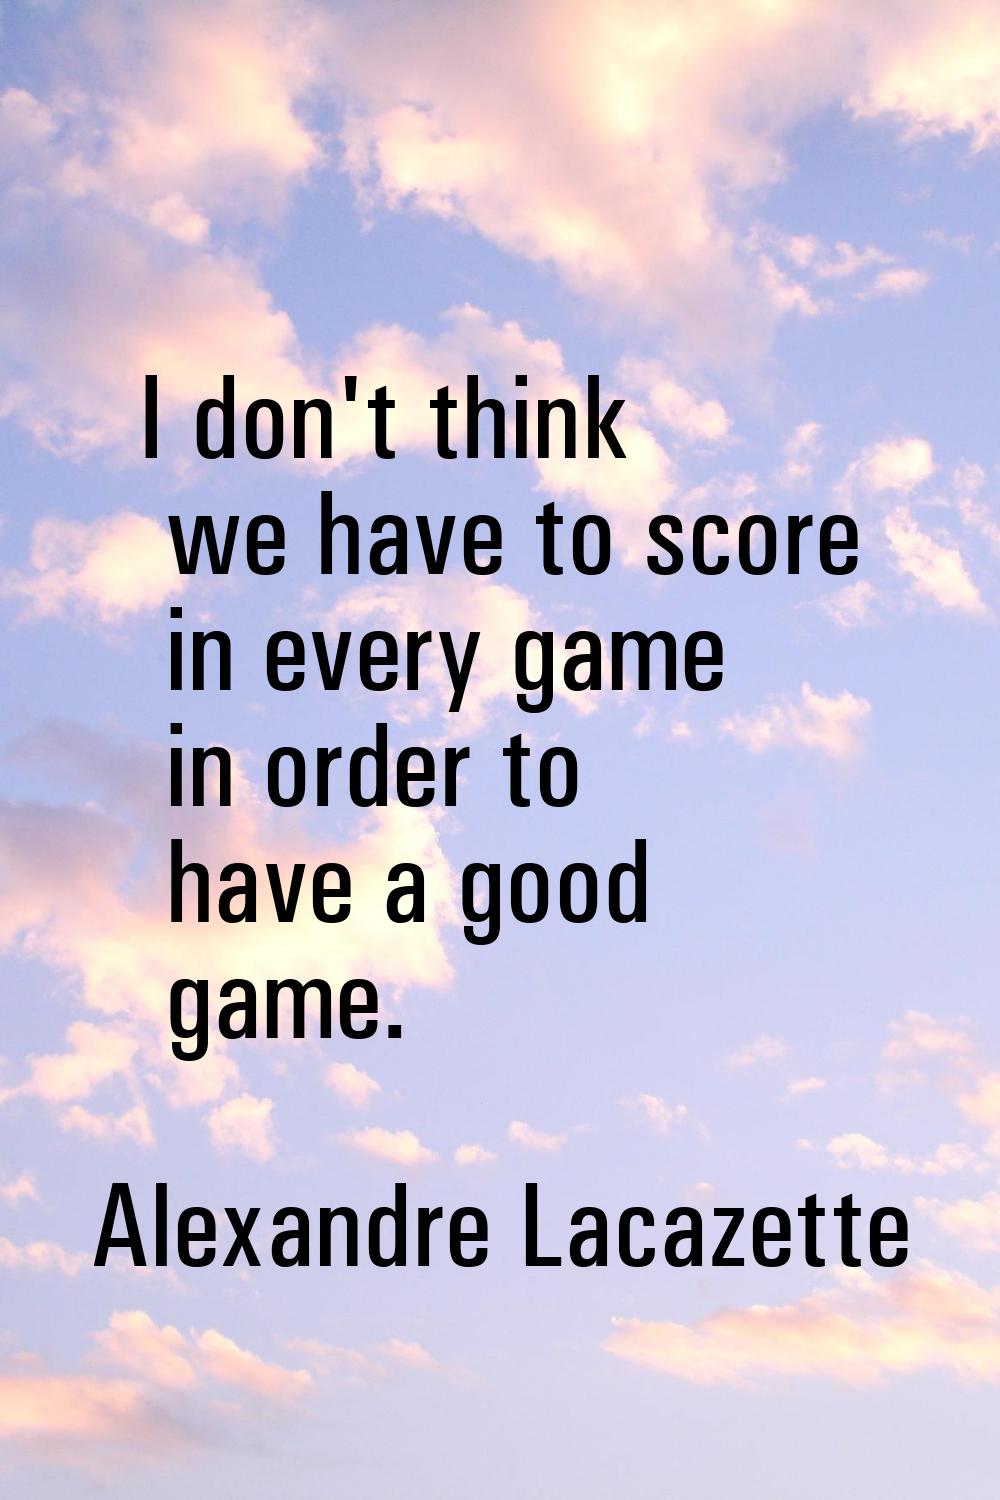 I don't think we have to score in every game in order to have a good game.